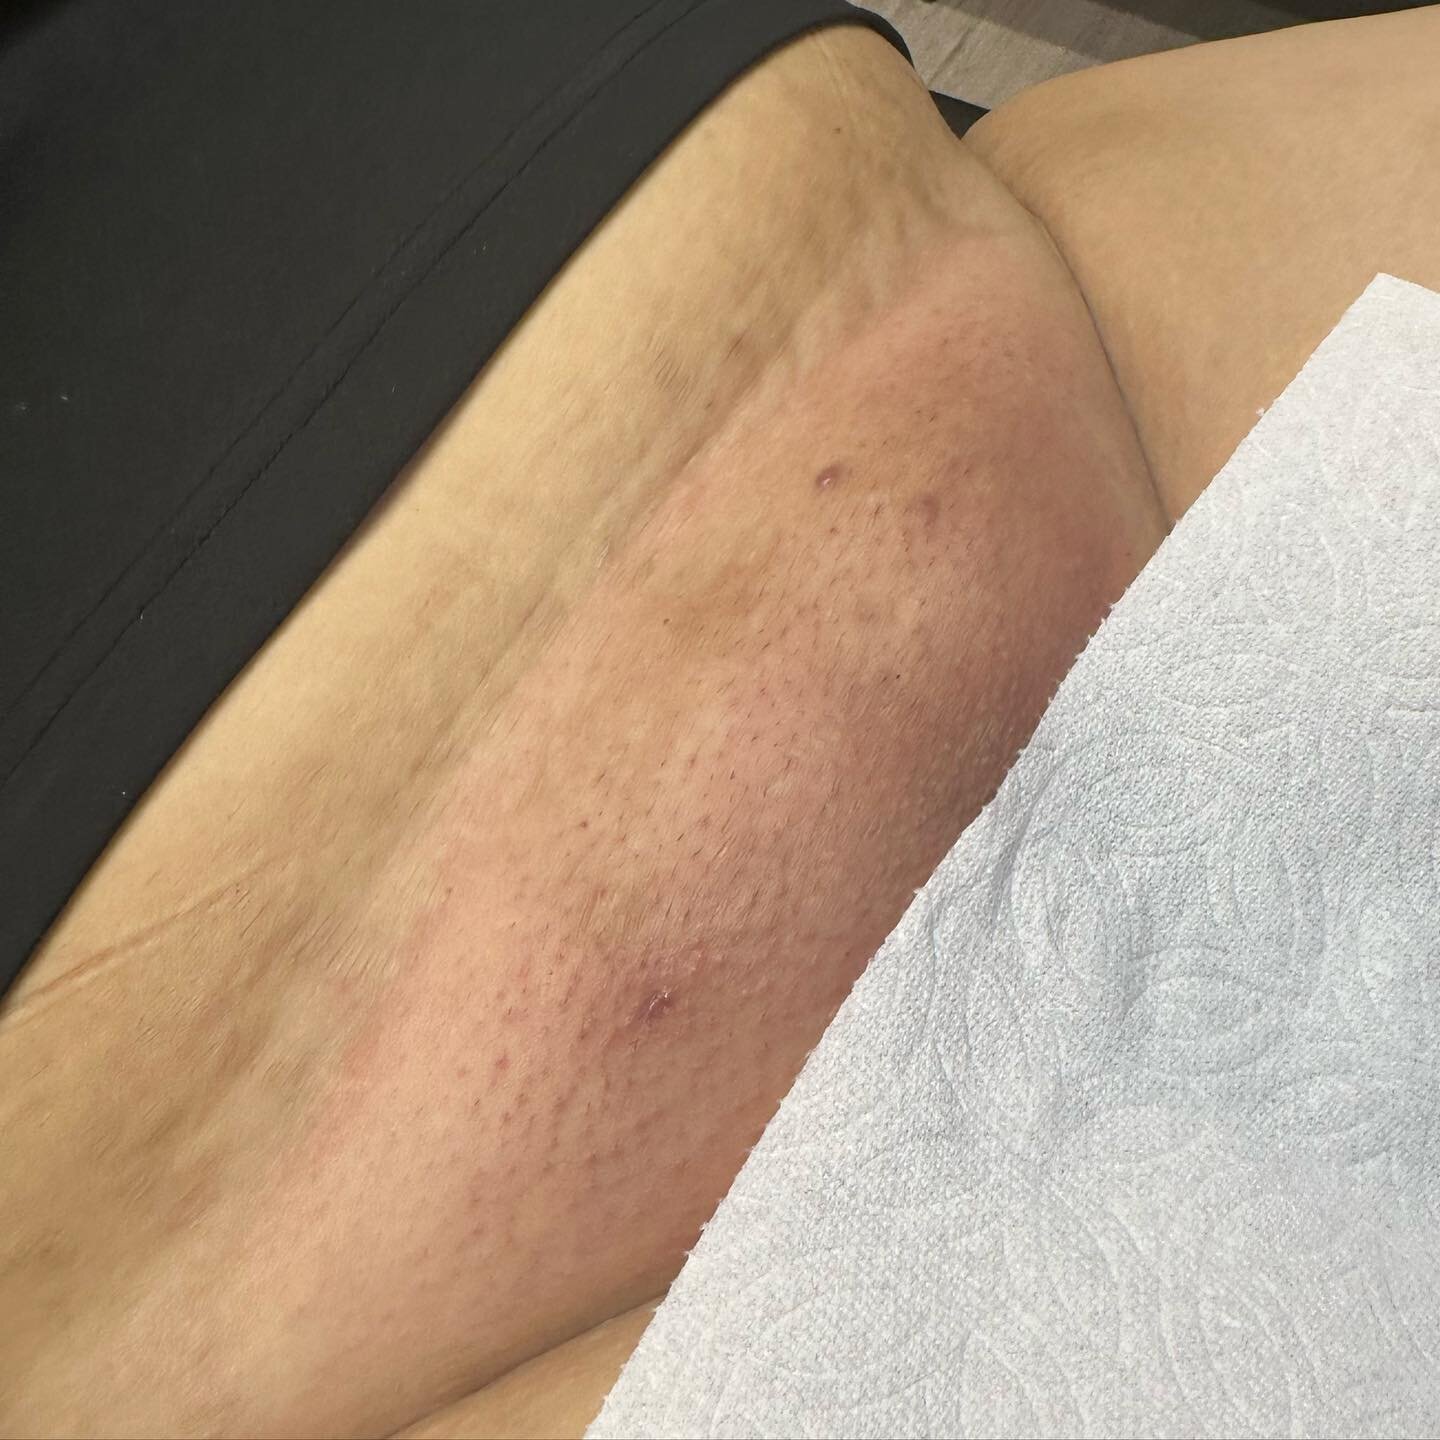 Sorry NOT Sorry that your IG feed keeps getting blasted with VAGS&rsquo;! 😝
I can&rsquo;t help share the awesome results!!!

#sanantoniowaxer #waxer #wax #brazilianwaxing #esthetician #cosmetology #wax #waxsuite